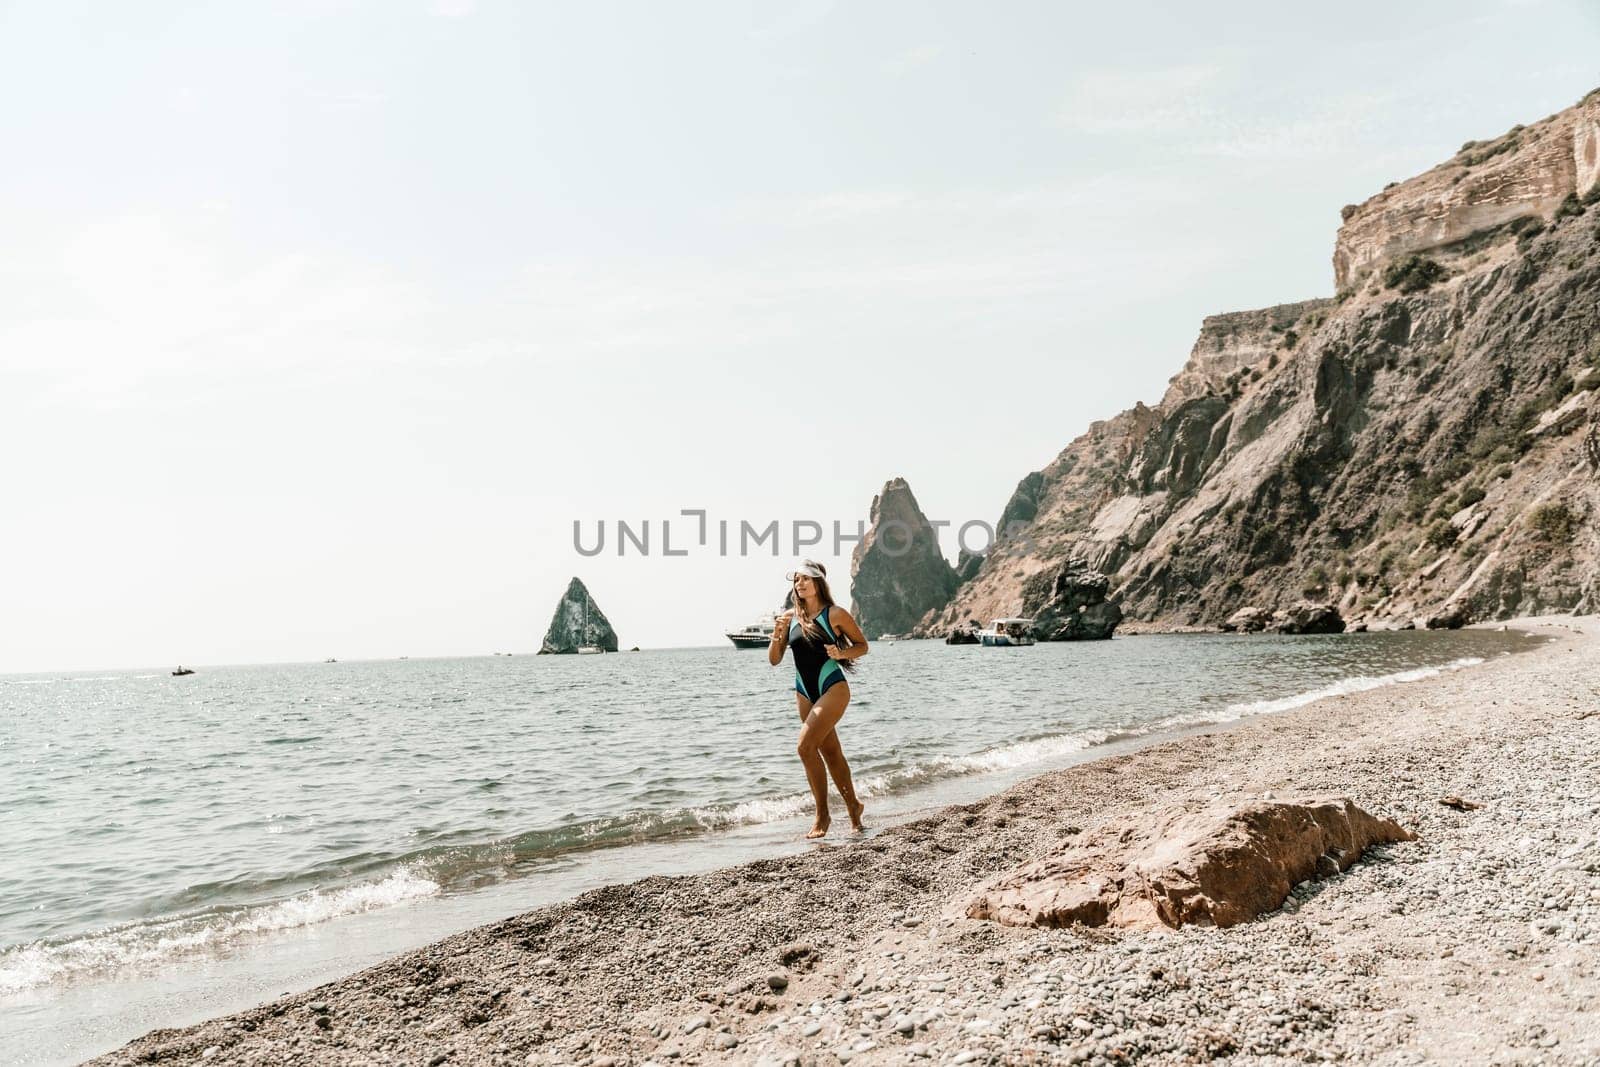 Woman beach vacation photo. A happy tourist in a blue bikini enjoying the scenic view of the sea and volcanic mountains while taking pictures to capture the memories of her travel adventure